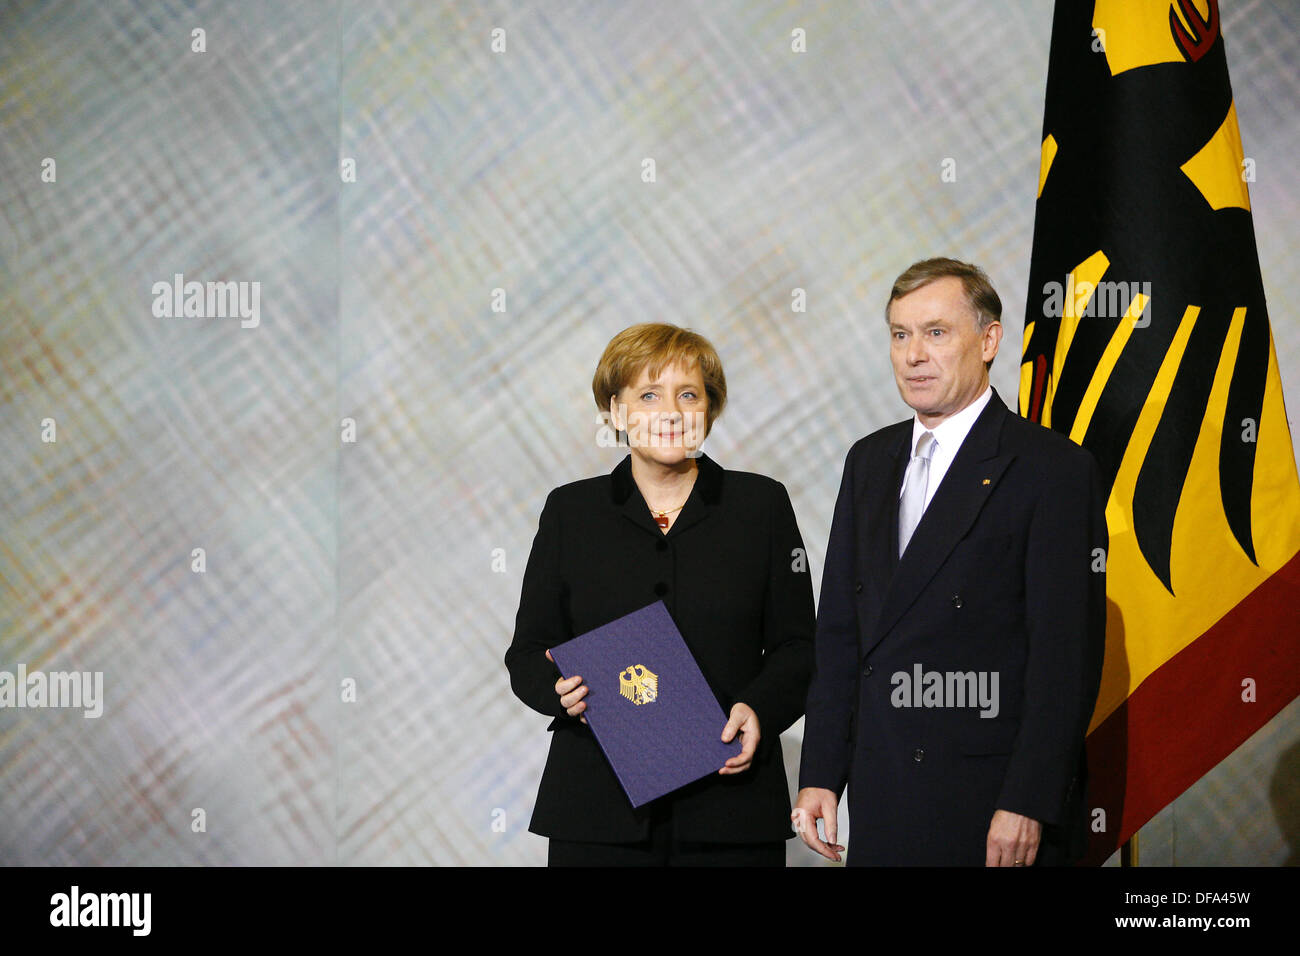 Head of state Horst Köhler (r) hands over the certificate of appointment to Angela Merkel (22.11.2005) who was elected as chancellor.  Foto: Michael Hanschke dpa/lbn +++(c) dpa - Report+++ Stock Photo